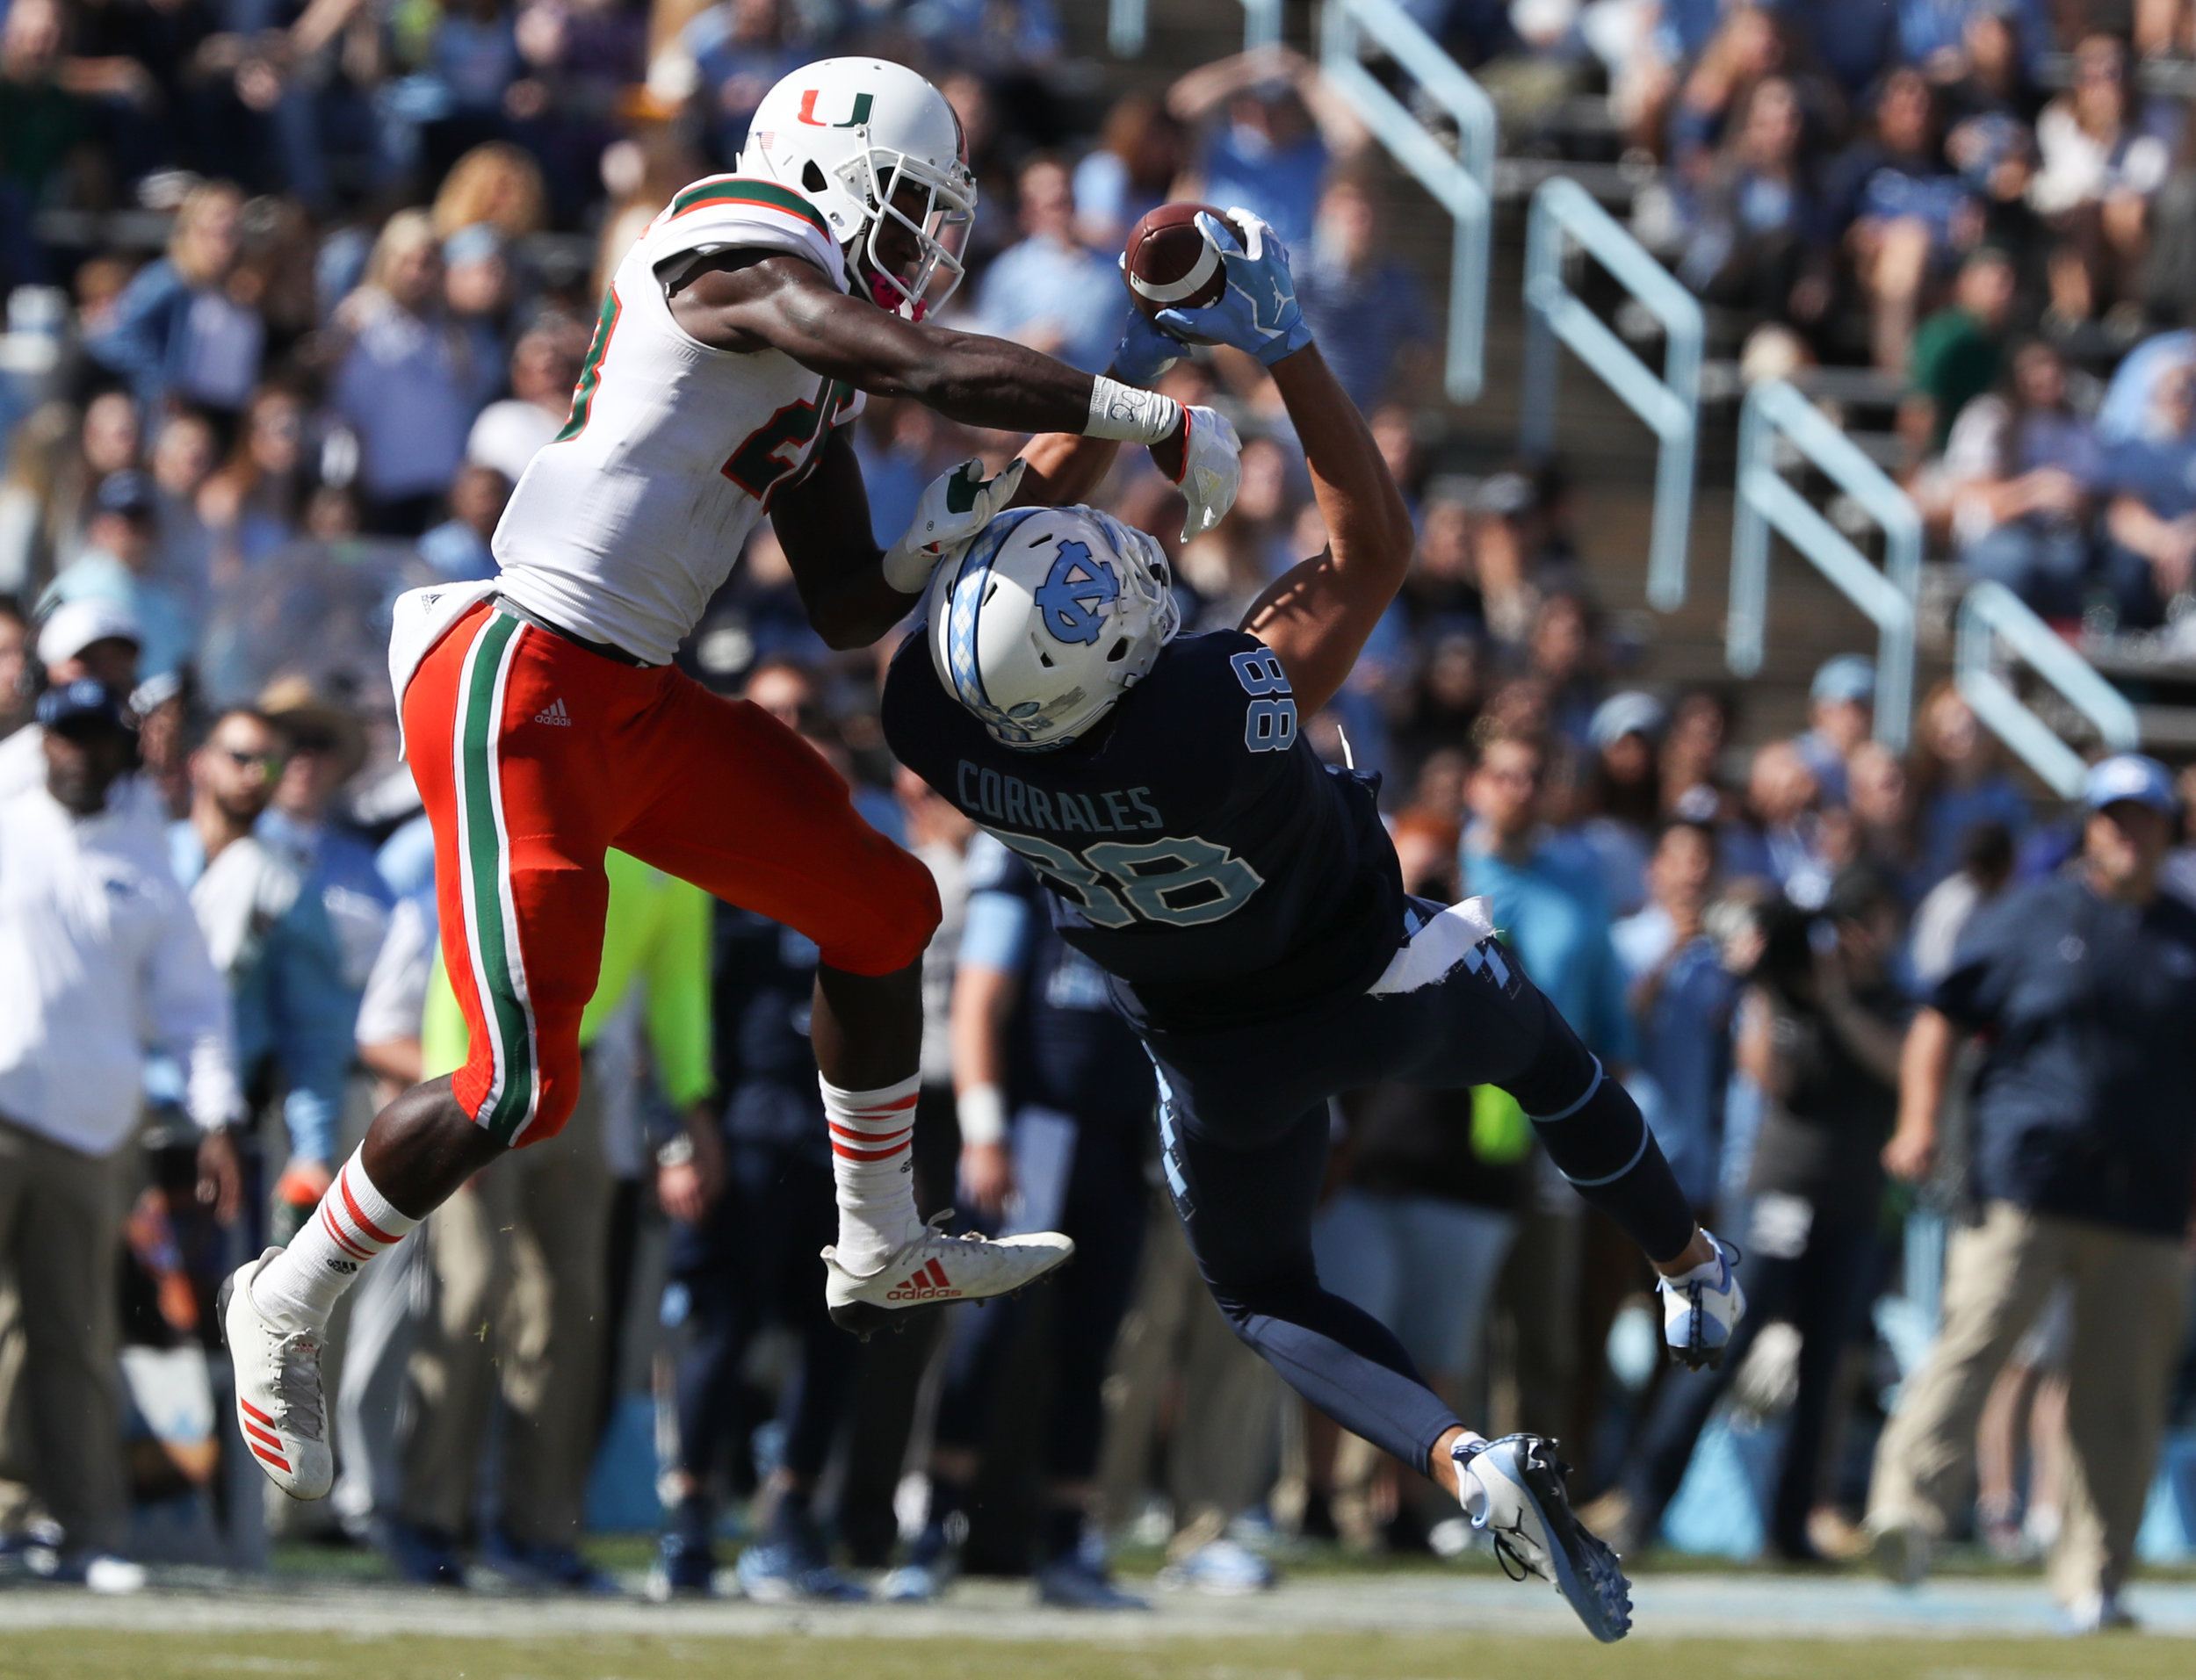  UNC’s Beau Corrales, right, grabs a pass in front of Miami’s Michael Jackson during Saturday’s game at Kenan Memorial Stadium in Chapel Hill, NC on October 28, 2017. The Hurricanes beat the Tar Heels 24 to 19. 